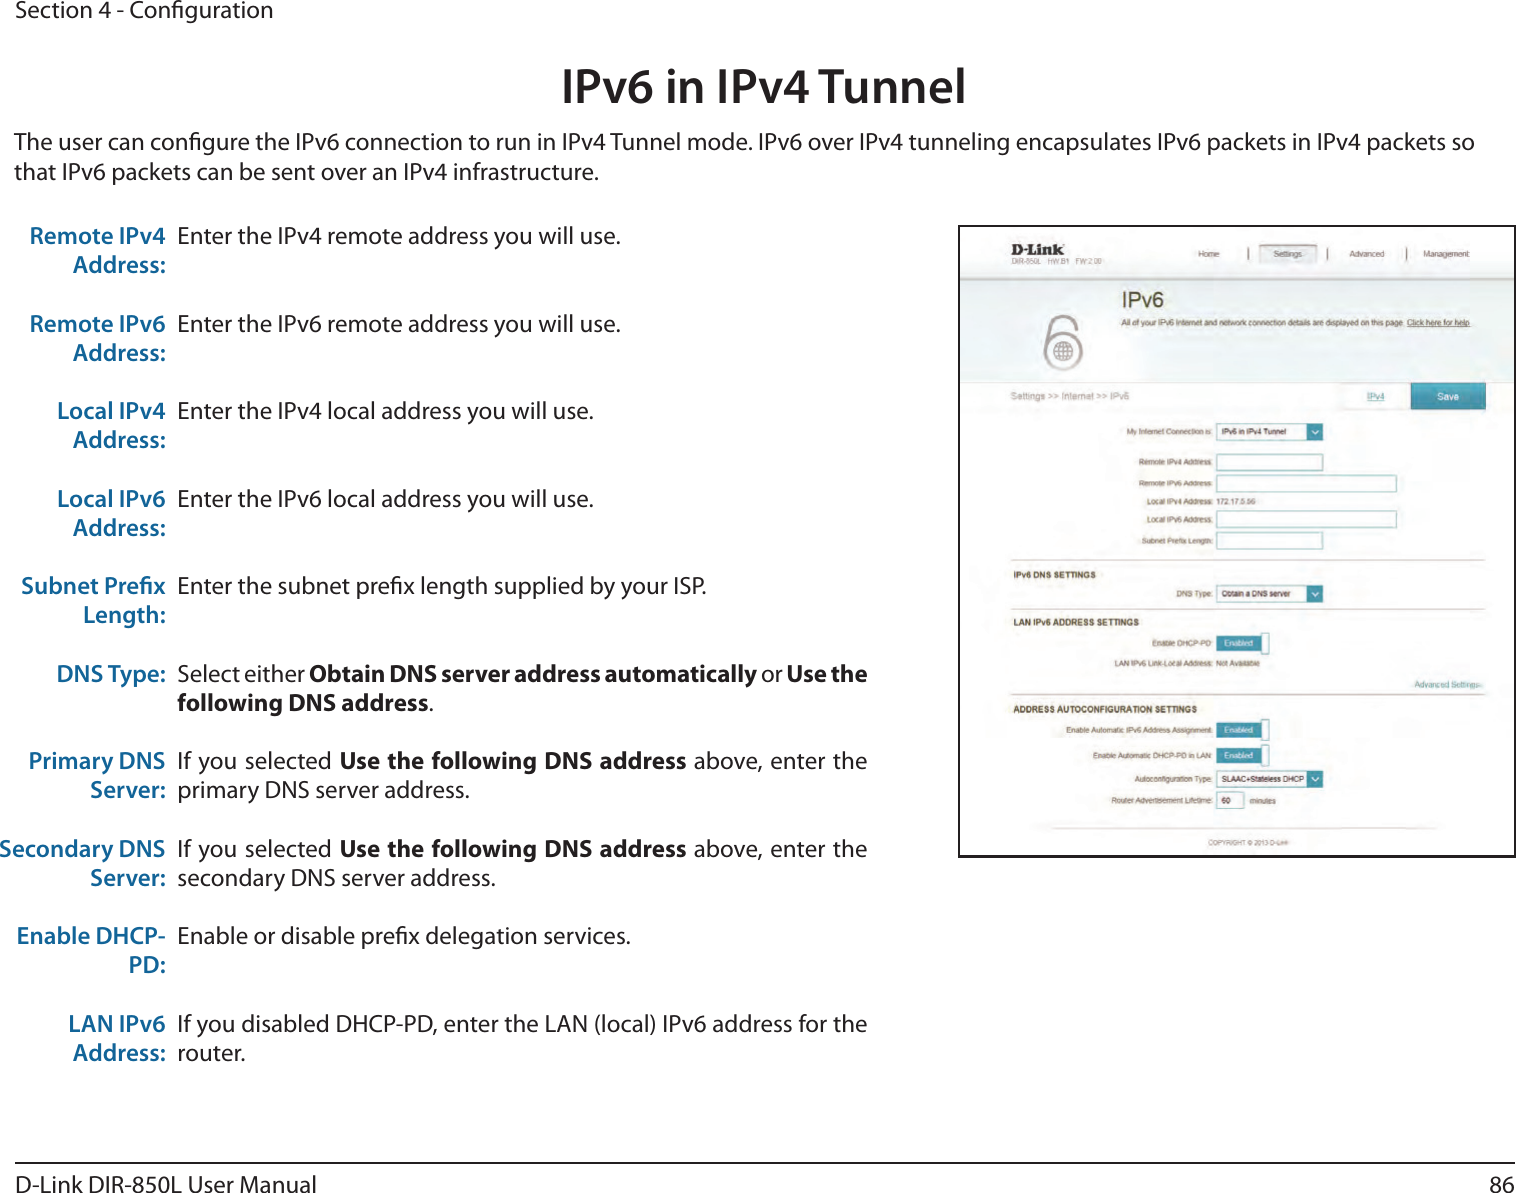 86D-Link DIR-850L User ManualSection 4 - CongurationIPv6 in IPv4 TunnelEnter the IPv4 remote address you will use.Enter the IPv6 remote address you will use.Enter the IPv4 local address you will use.Enter the IPv6 local address you will use.Enter the subnet prex length supplied by your ISP.Select either Obtain DNS server address automatically or Use the following DNS address.If you selected Use the following DNS address above, enter the primary DNS server address. If you selected Use the following DNS address above, enter the secondary DNS server address.Enable or disable prex delegation services.If you disabled DHCP-PD, enter the LAN (local) IPv6 address for the router.Remote IPv4 Address:Remote IPv6 Address:Local IPv4 Address:Local IPv6 Address:Subnet Prex Length:DNS Type:Primary DNS Server:Secondary DNS Server:Enable DHCP-PD:LAN IPv6 Address:The user can congure the IPv6 connection to run in IPv4 Tunnel mode. IPv6 over IPv4 tunneling encapsulates IPv6 packets in IPv4 packets so that IPv6 packets can be sent over an IPv4 infrastructure.